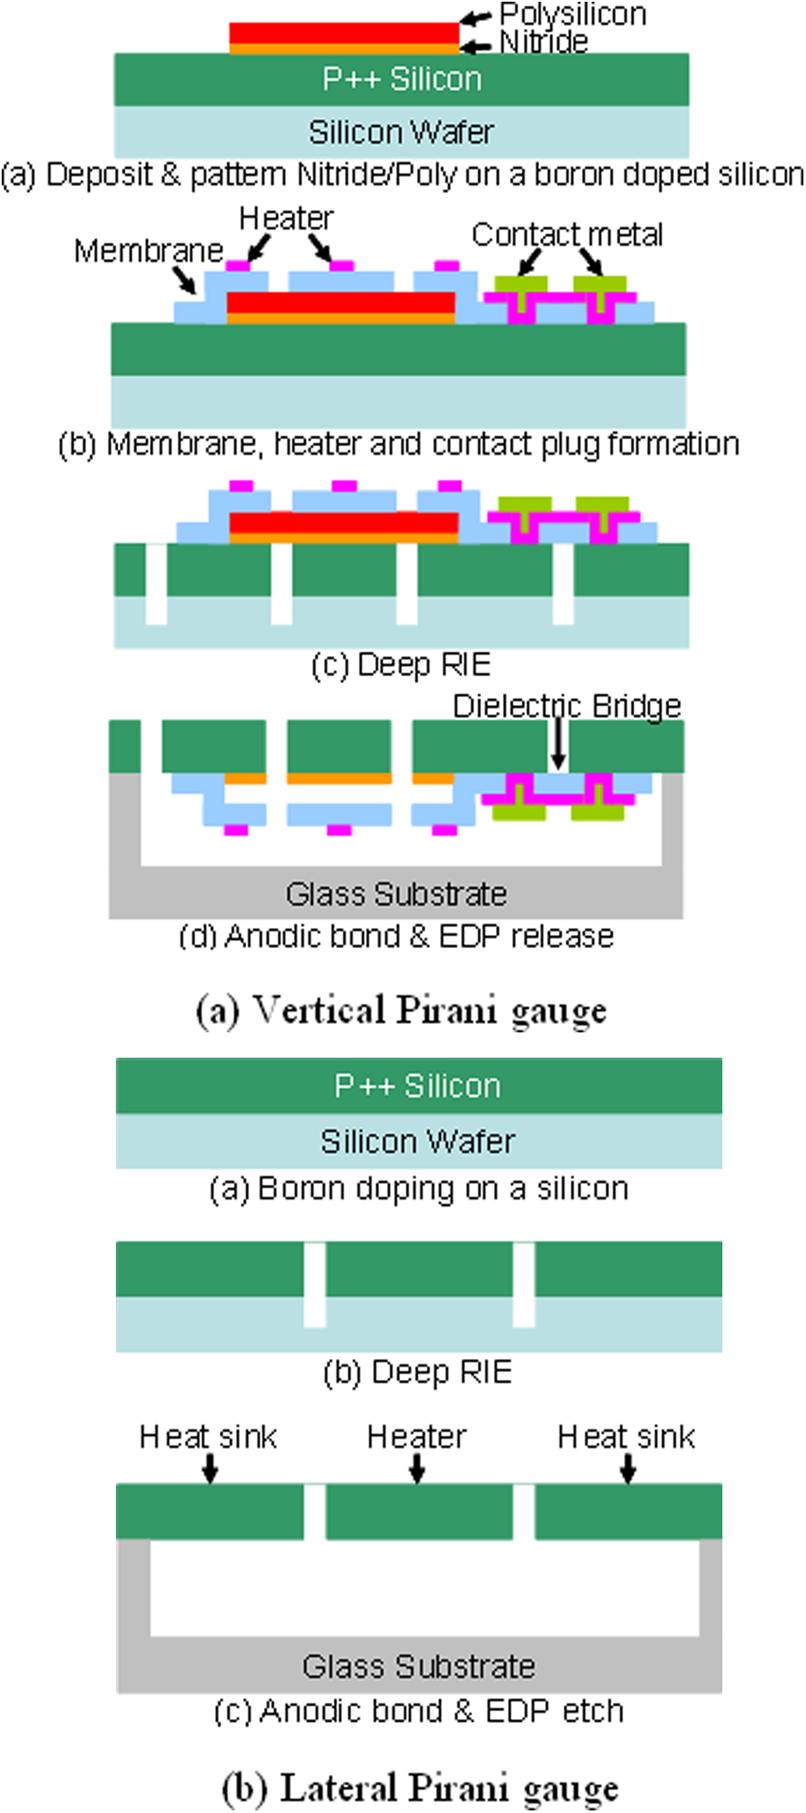 The p++ silicon can be utilized as a structural material for a variety of MEMS devices that need vacuum environment for their operation.